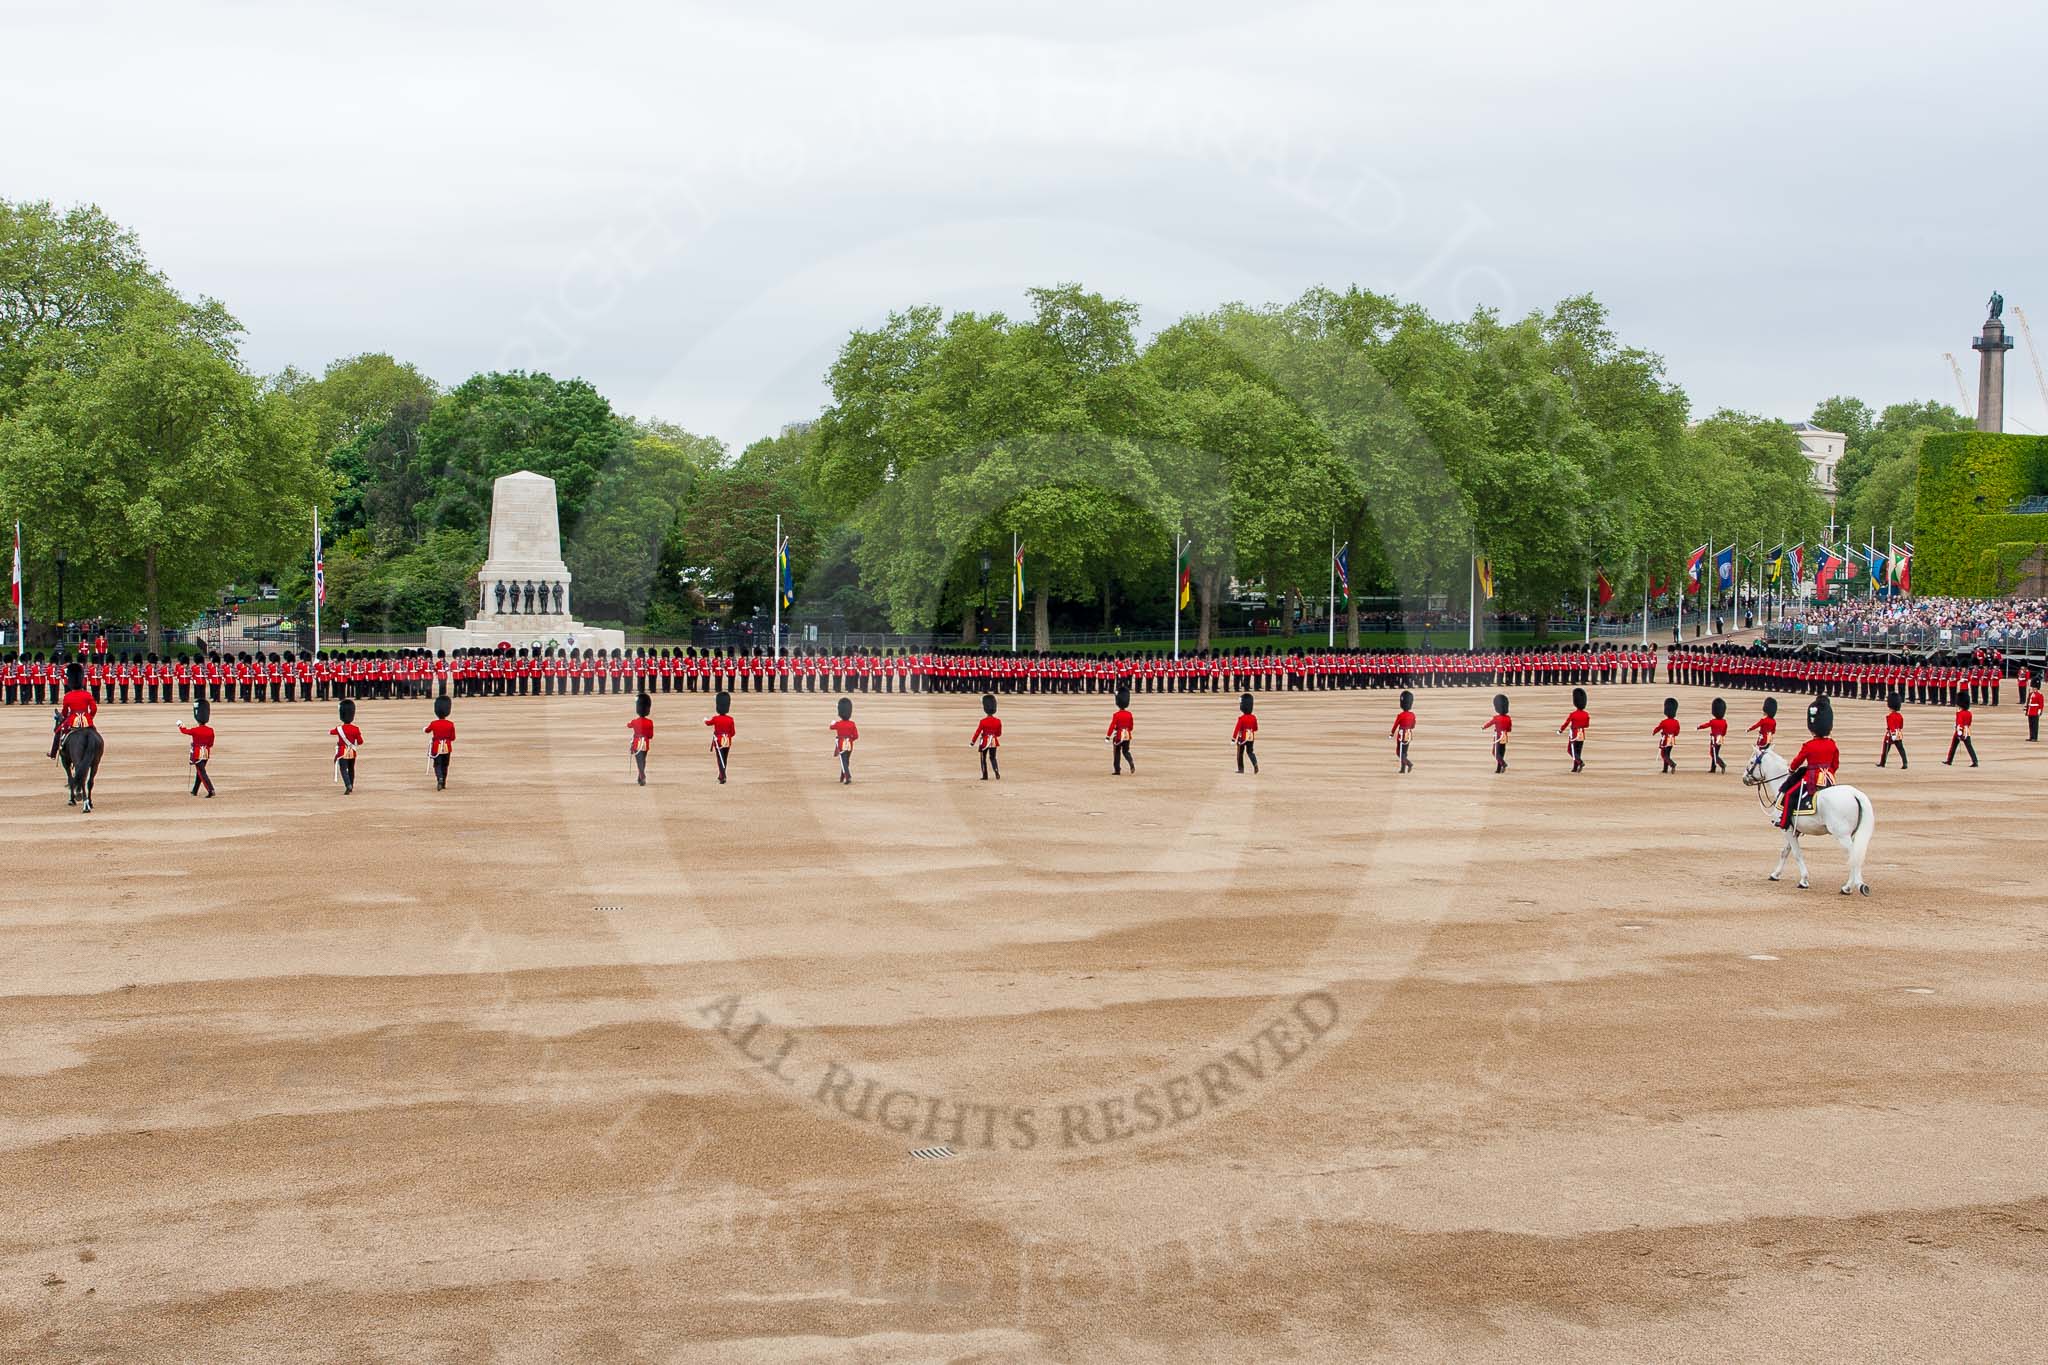 Major General's Review 2013: The officers marching back to their troops. Riding on the left is the Major of the Parade, and the Adjutant on the right. Behind them the Field Officer..
Horse Guards Parade, Westminster,
London SW1,

United Kingdom,
on 01 June 2013 at 10:41, image #170